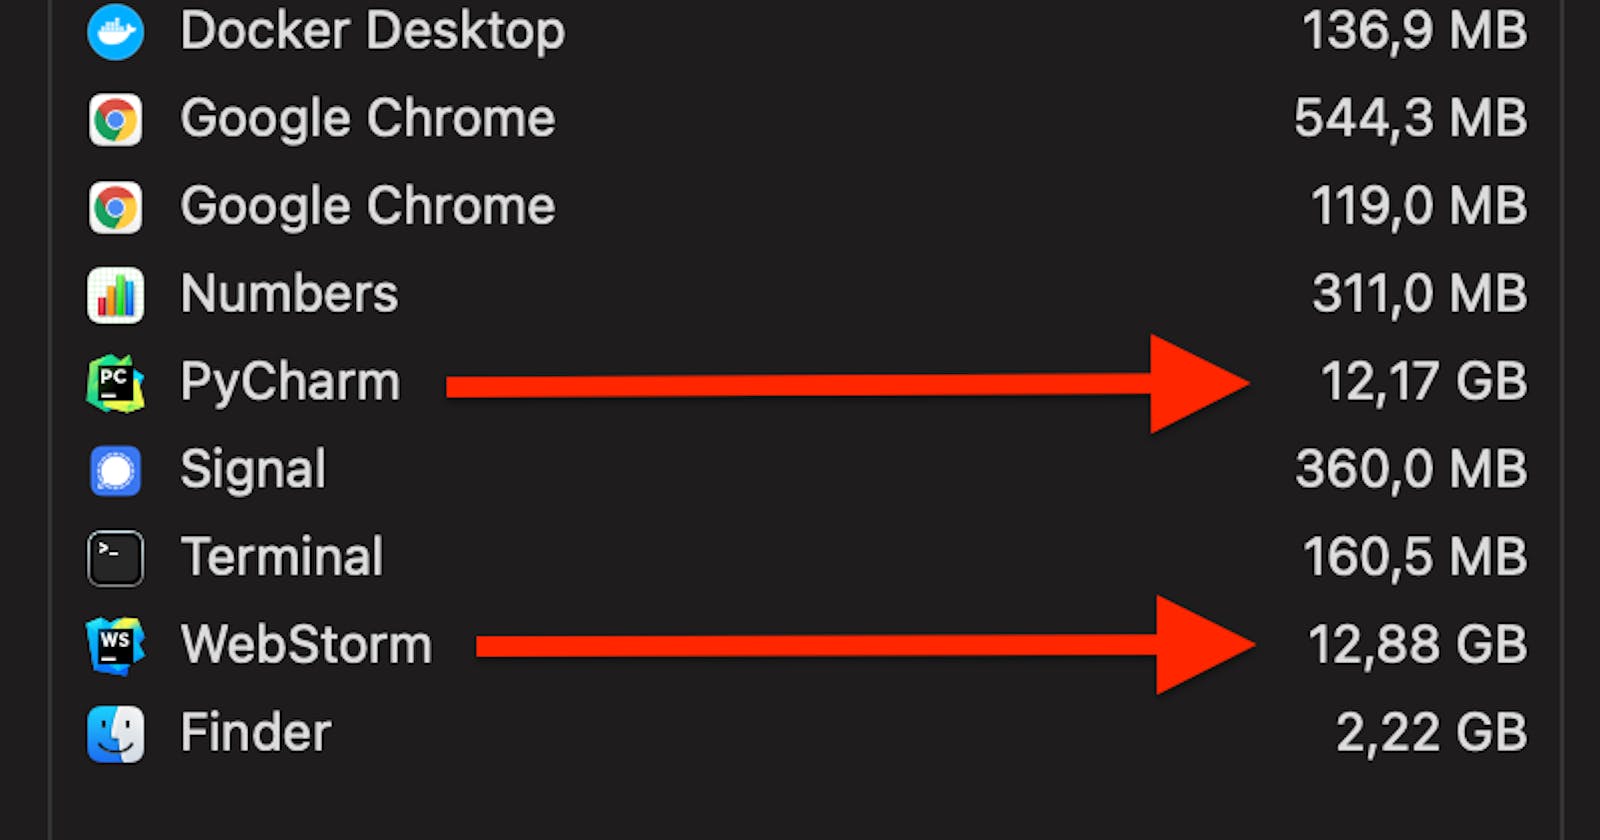 Is your JetBrains IDE turning into a memory hog? Try this simple fix